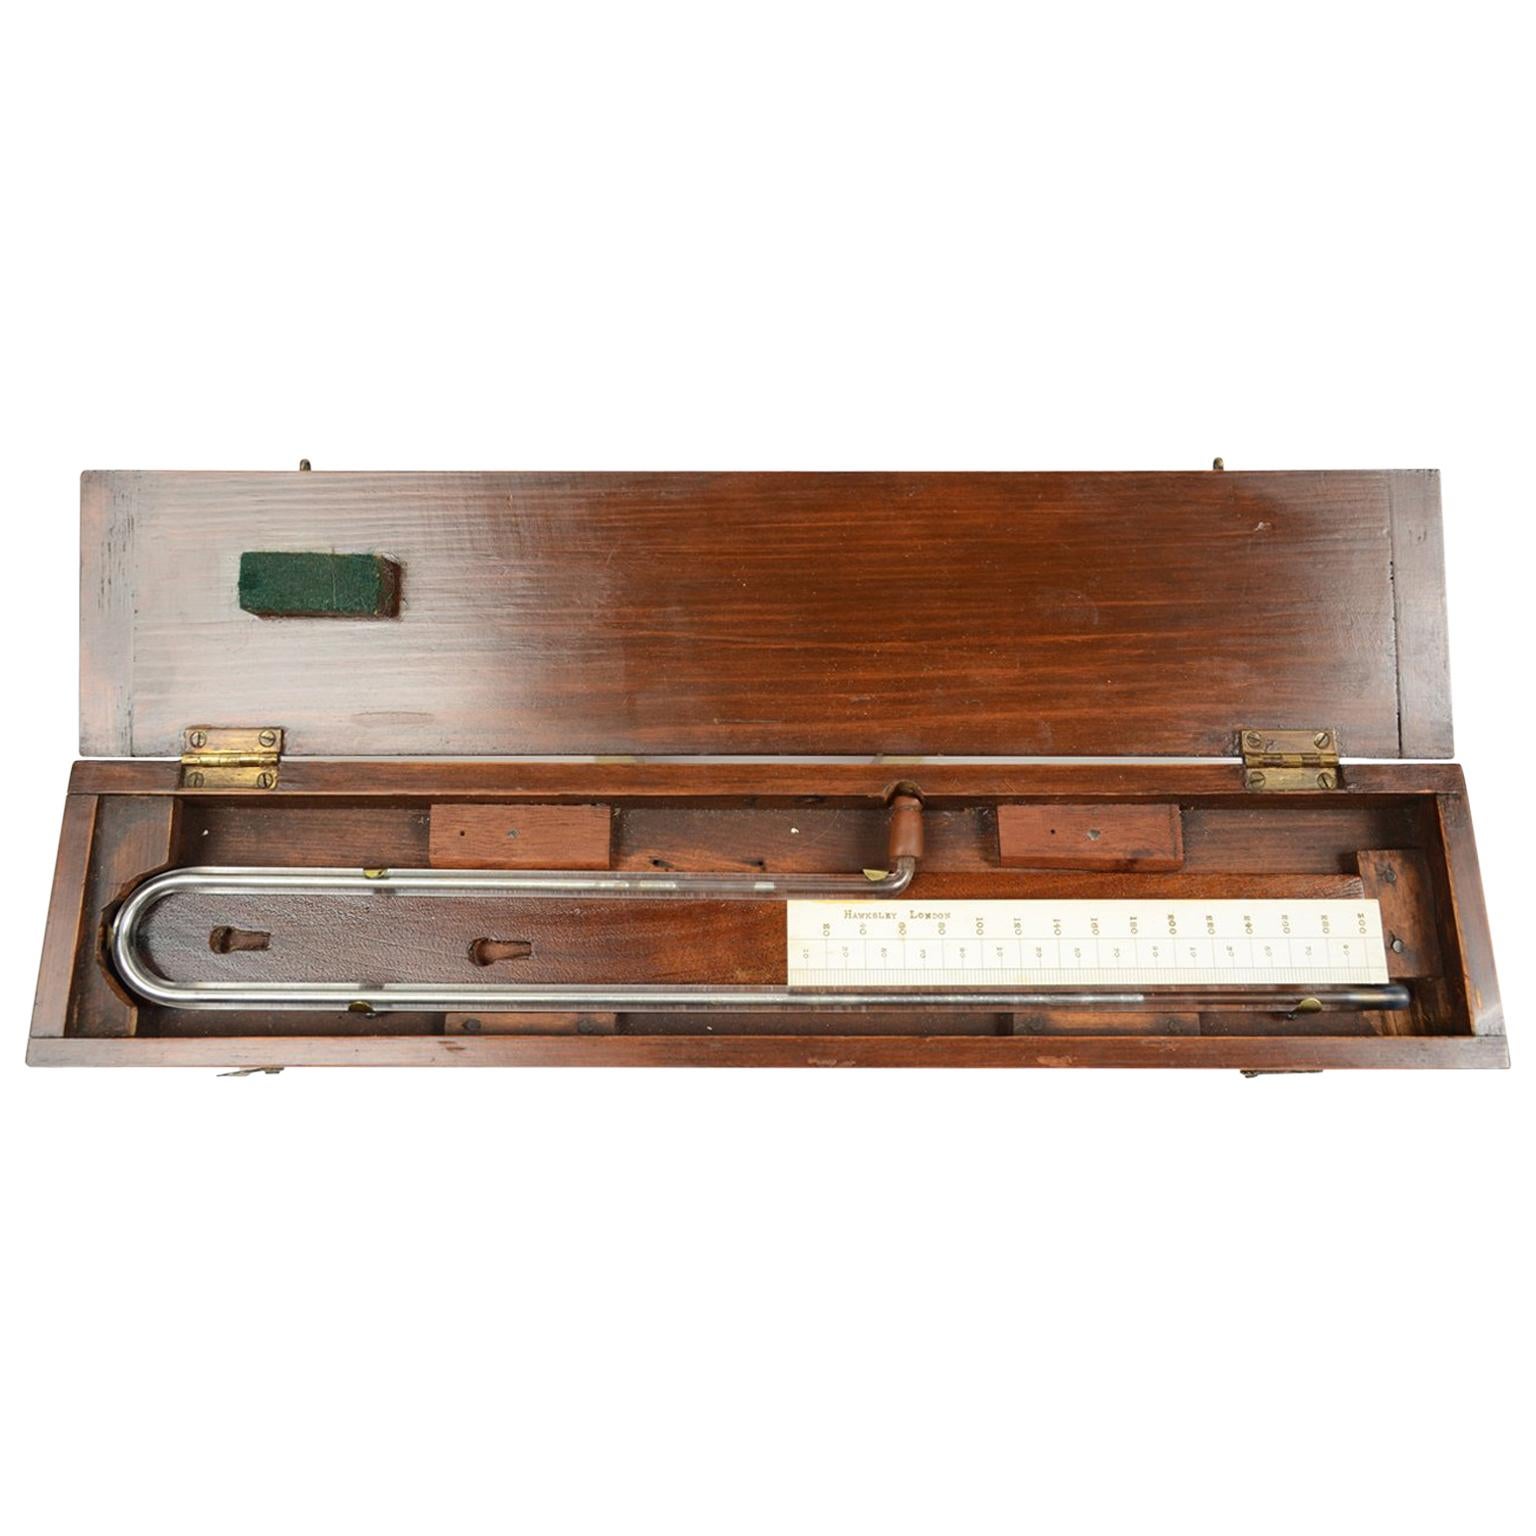 Travel Barometer of the Second Half of the 19th Century